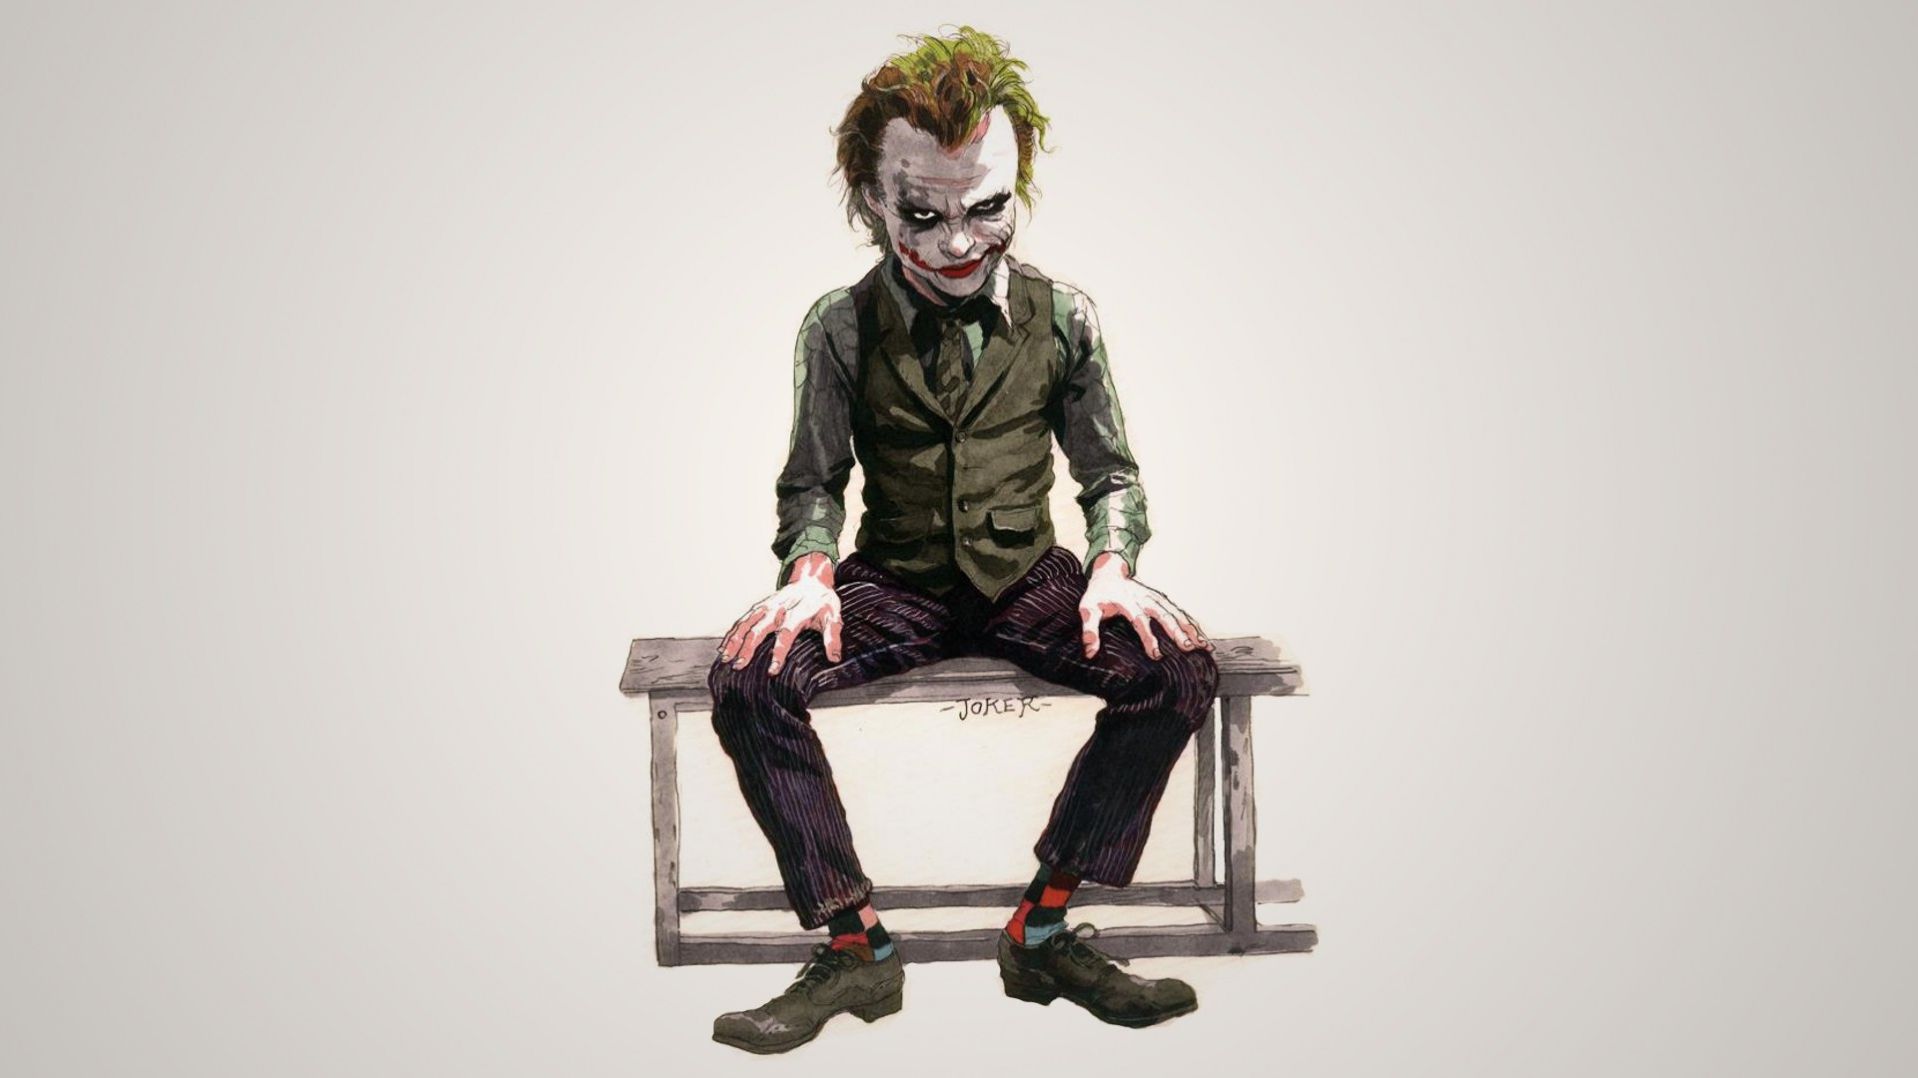 Check out The Joker as a teenager Wallpaper in HD. We add quality wallpaper, cover picture and funny pictu. Joker wallpaper, Joker HD wallpaper, Joker cartoon